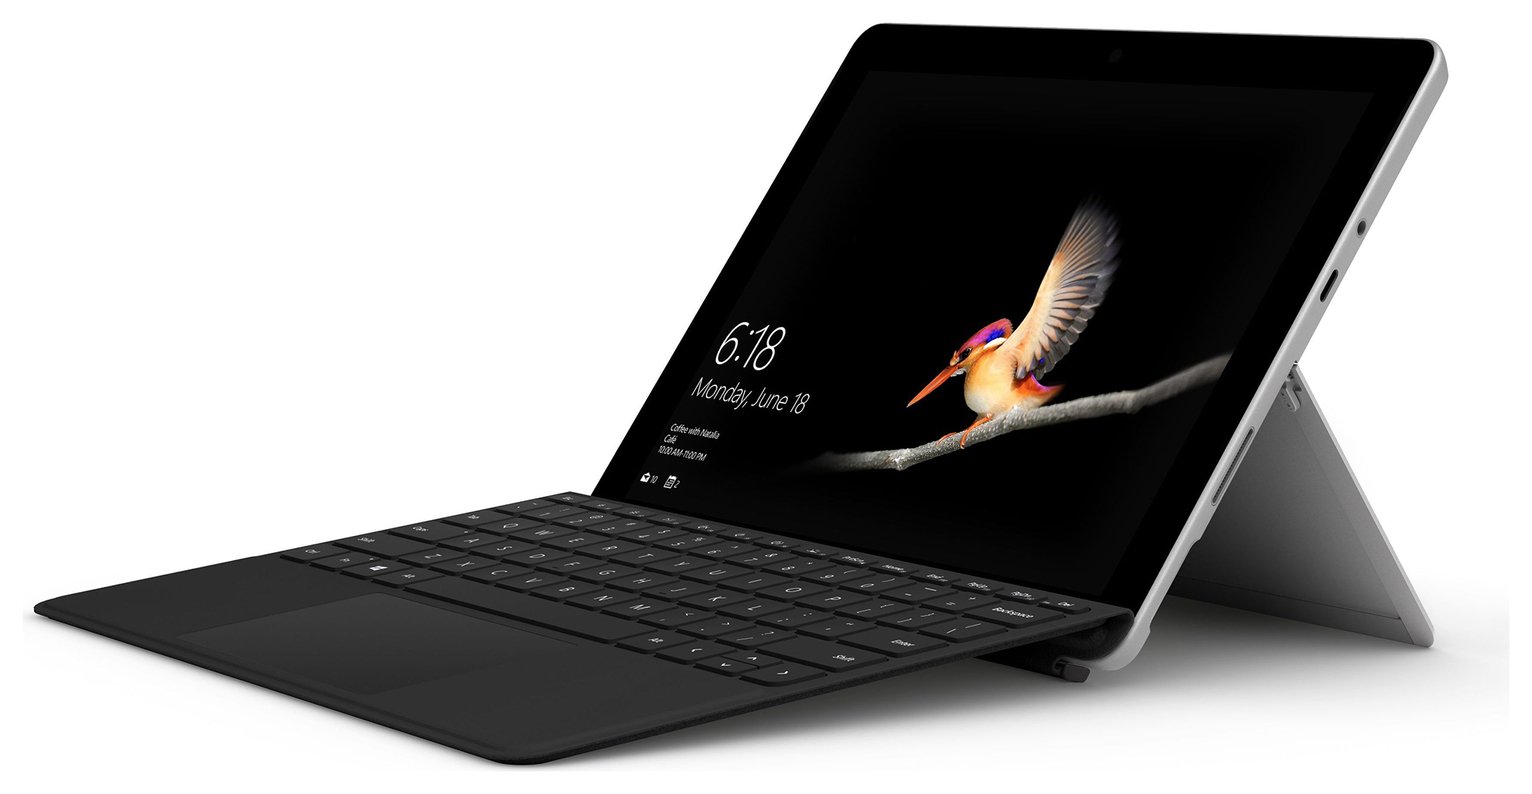 Microsoft Surface Go 4GB 64GB 2in1 Laptop with Type Cover Reviews